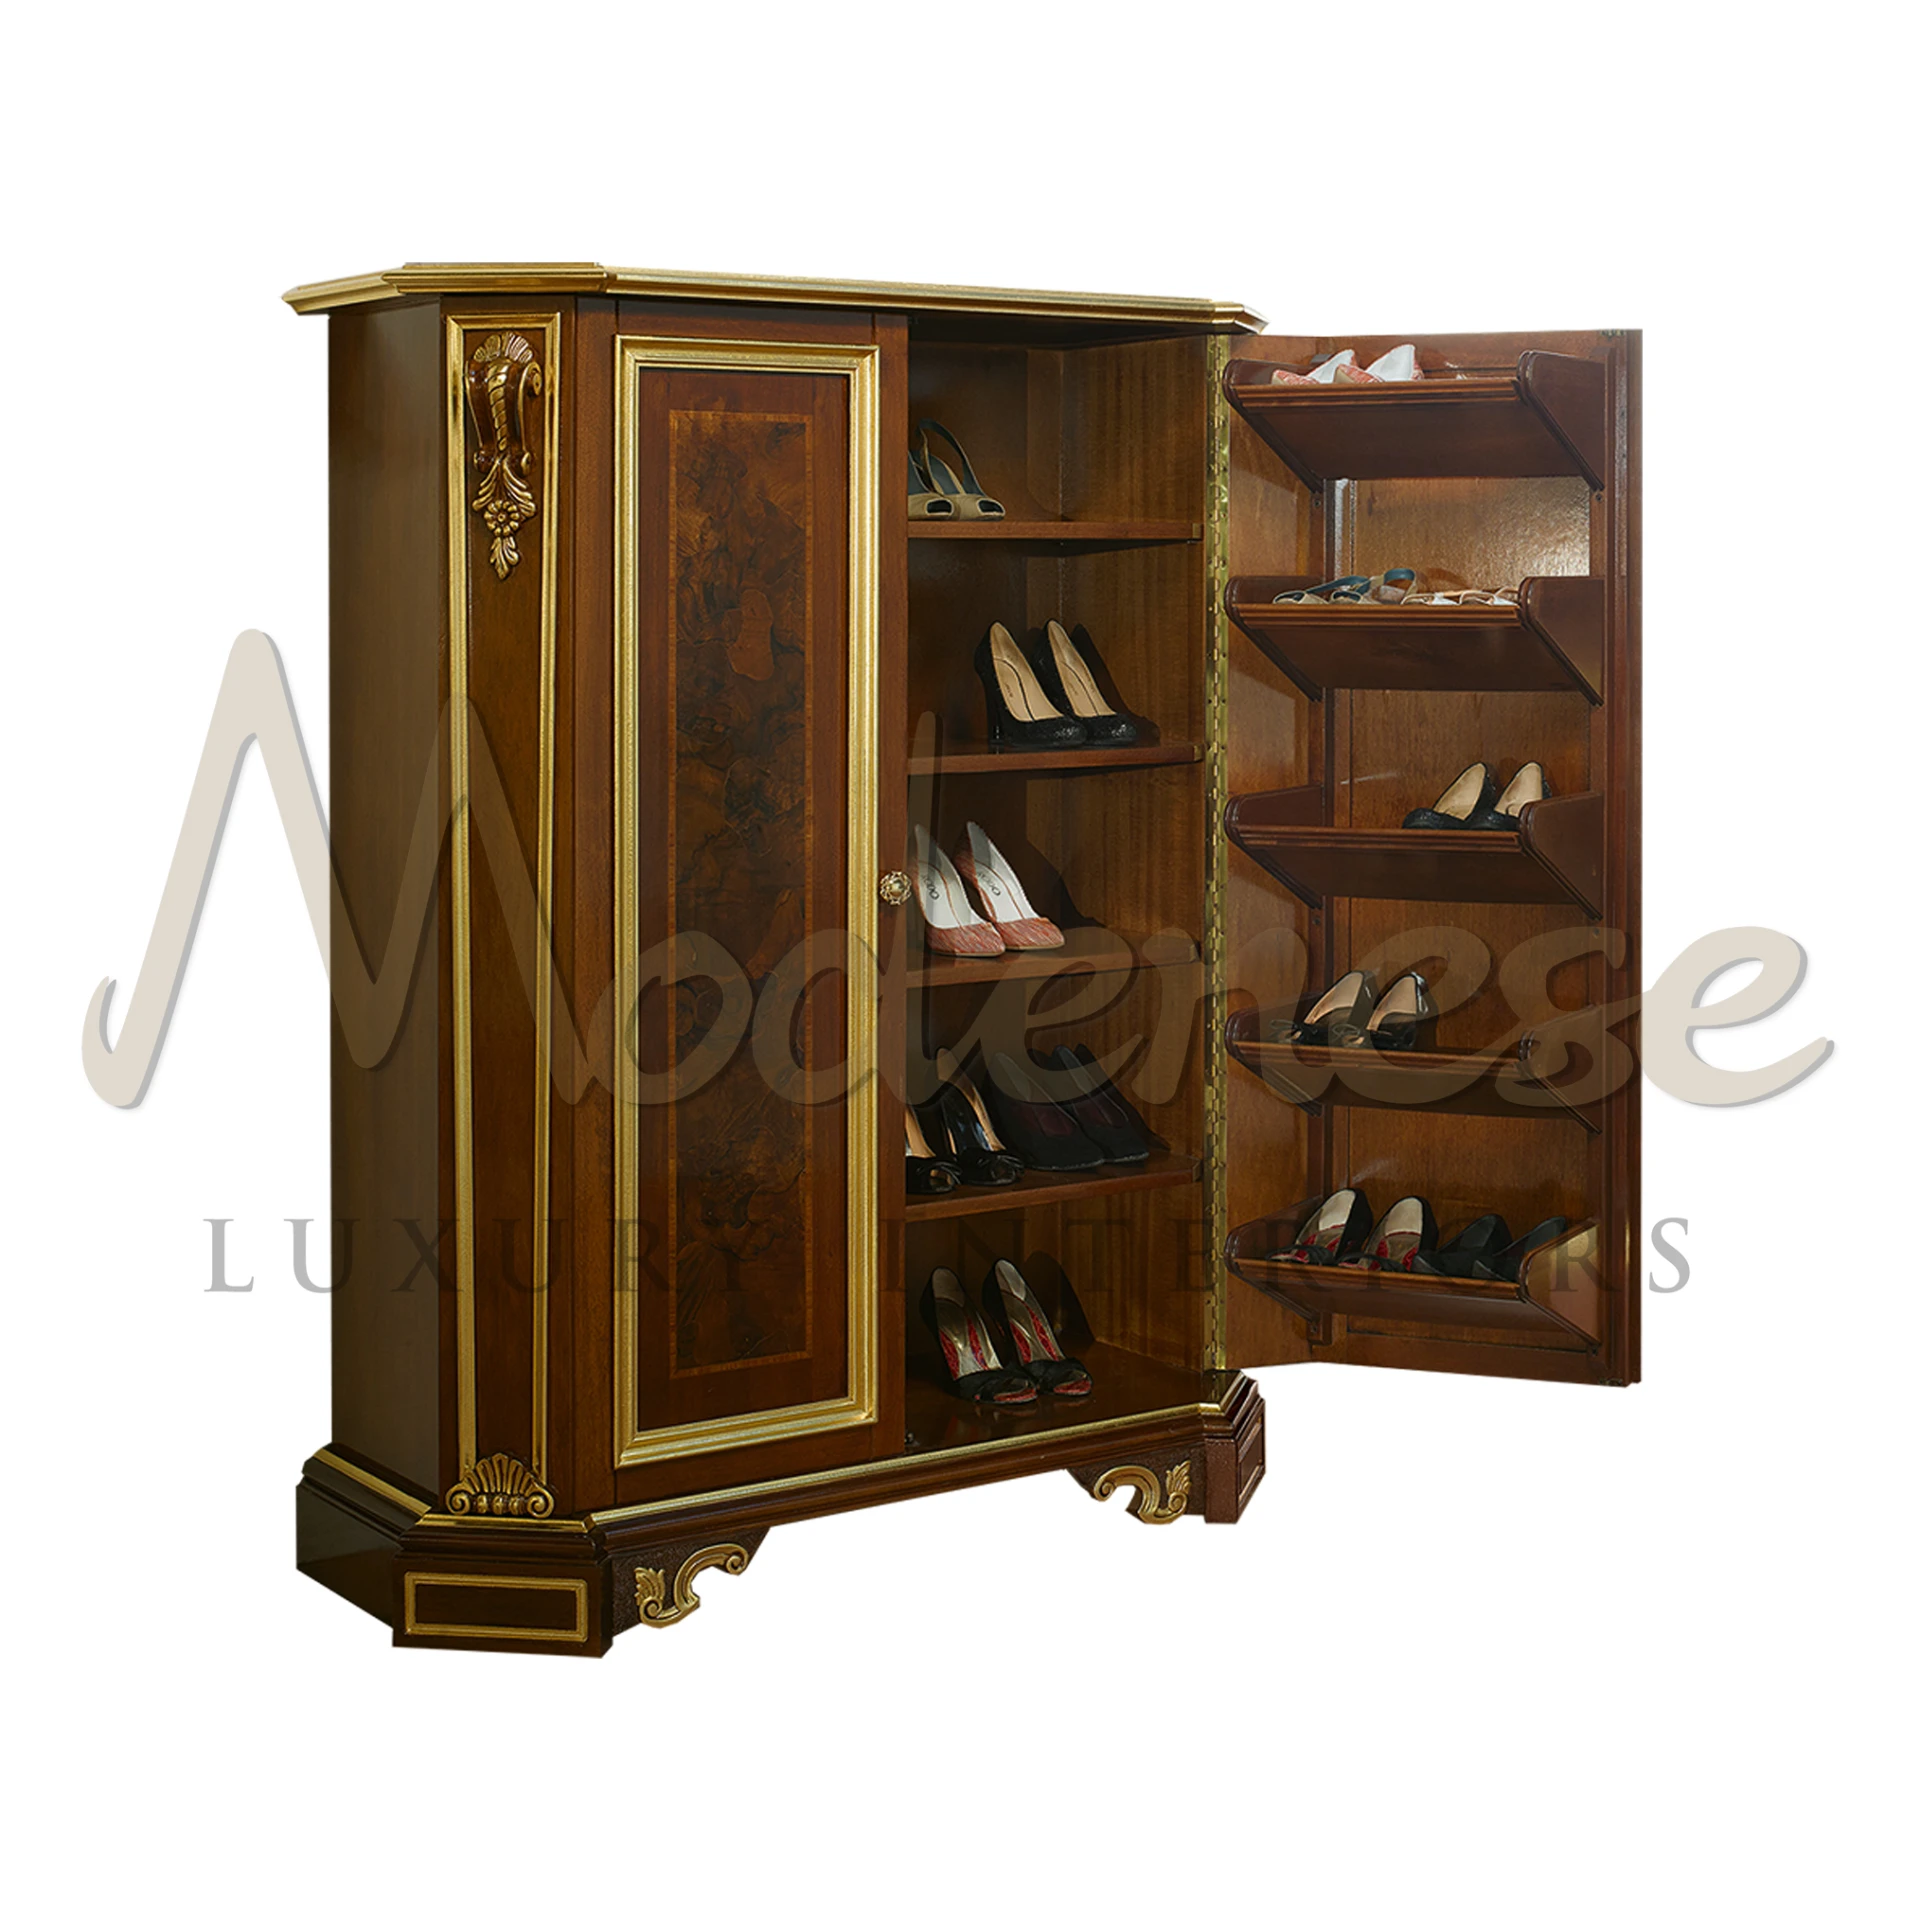 Open wooden shoe cabinet with intricate designs.                                                                                                                    